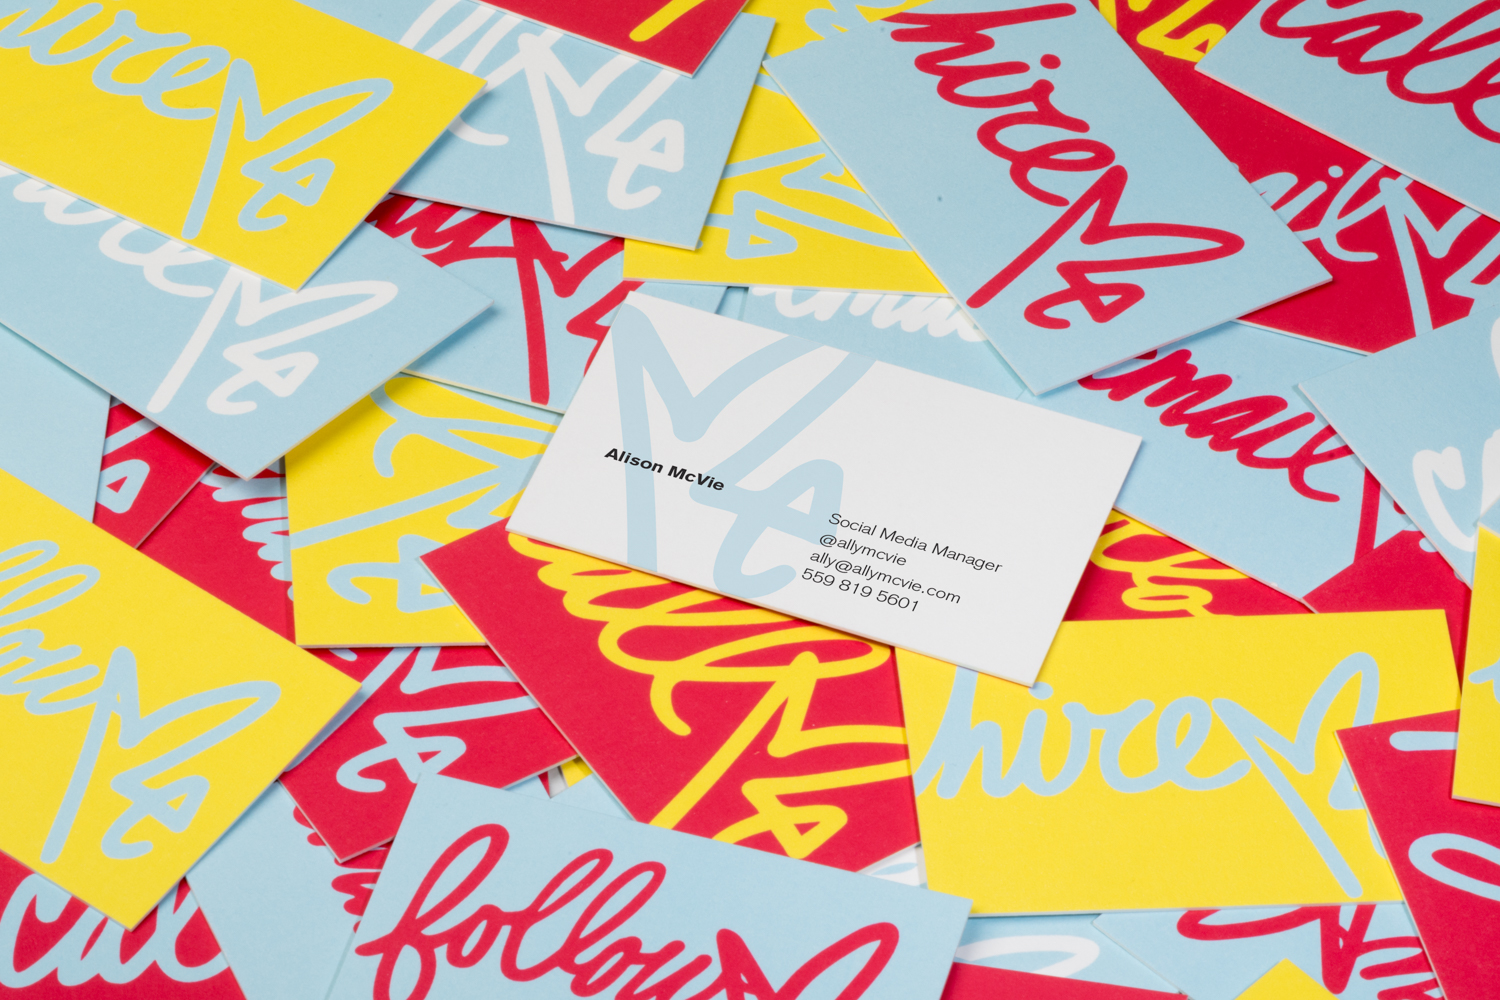 New MOO business cards play with famous artist's manifesto | Creative Bloq